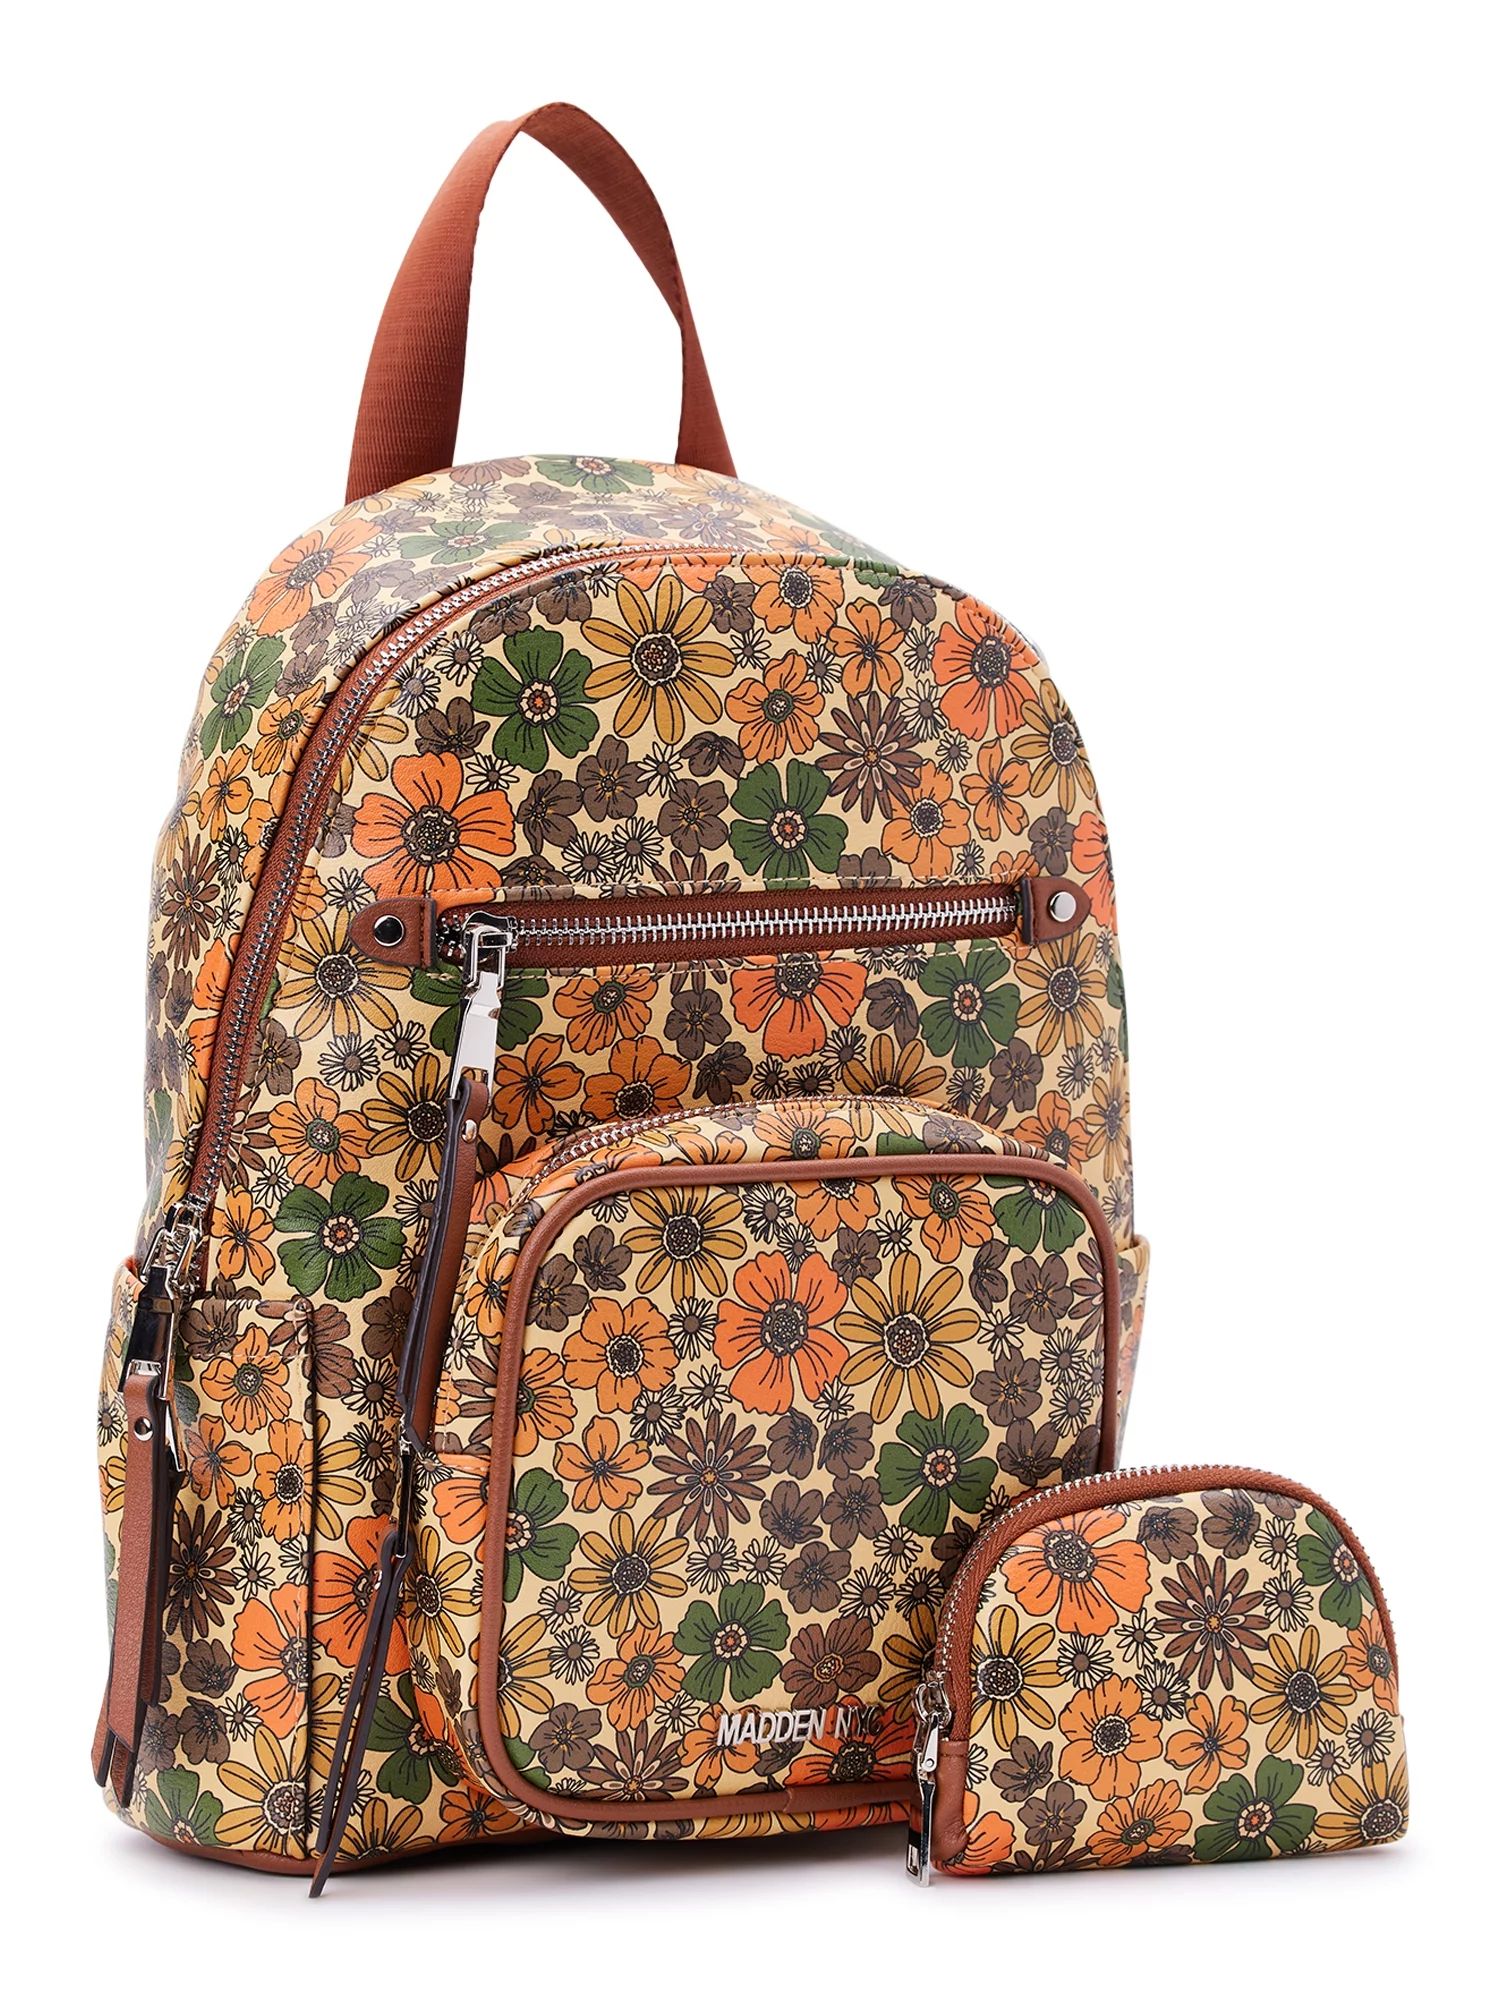 Madden NYC Women's Mini Backpack, Floral | Walmart (US)